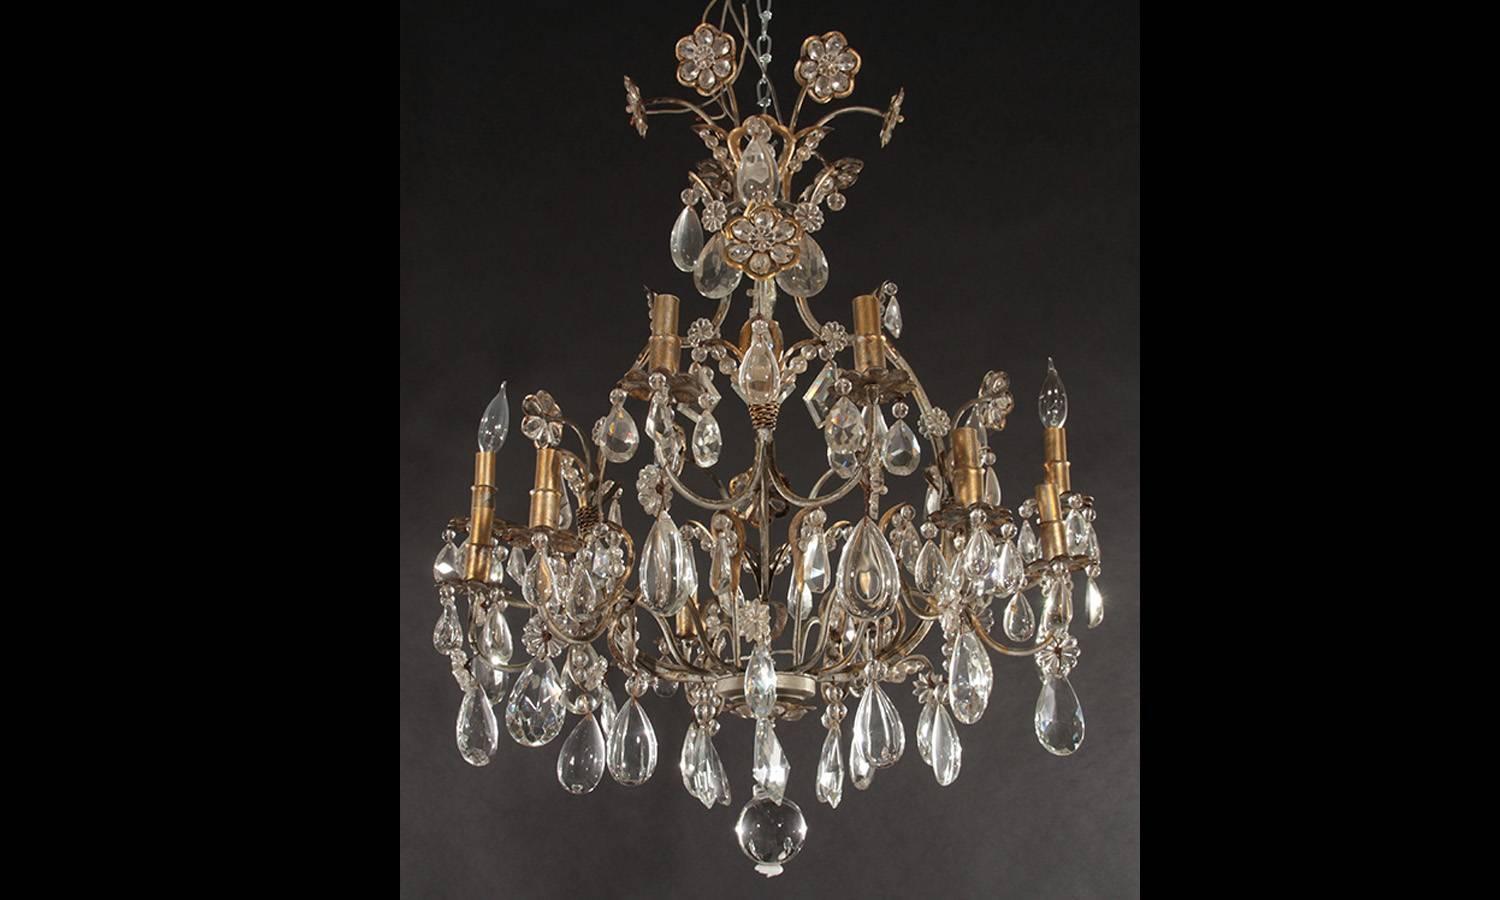 Hollywood Regency Gilt Decorated Wrought Iron and Crystal Eight-Arm Chandelier In Fair Condition For Sale In Newburgh, NY